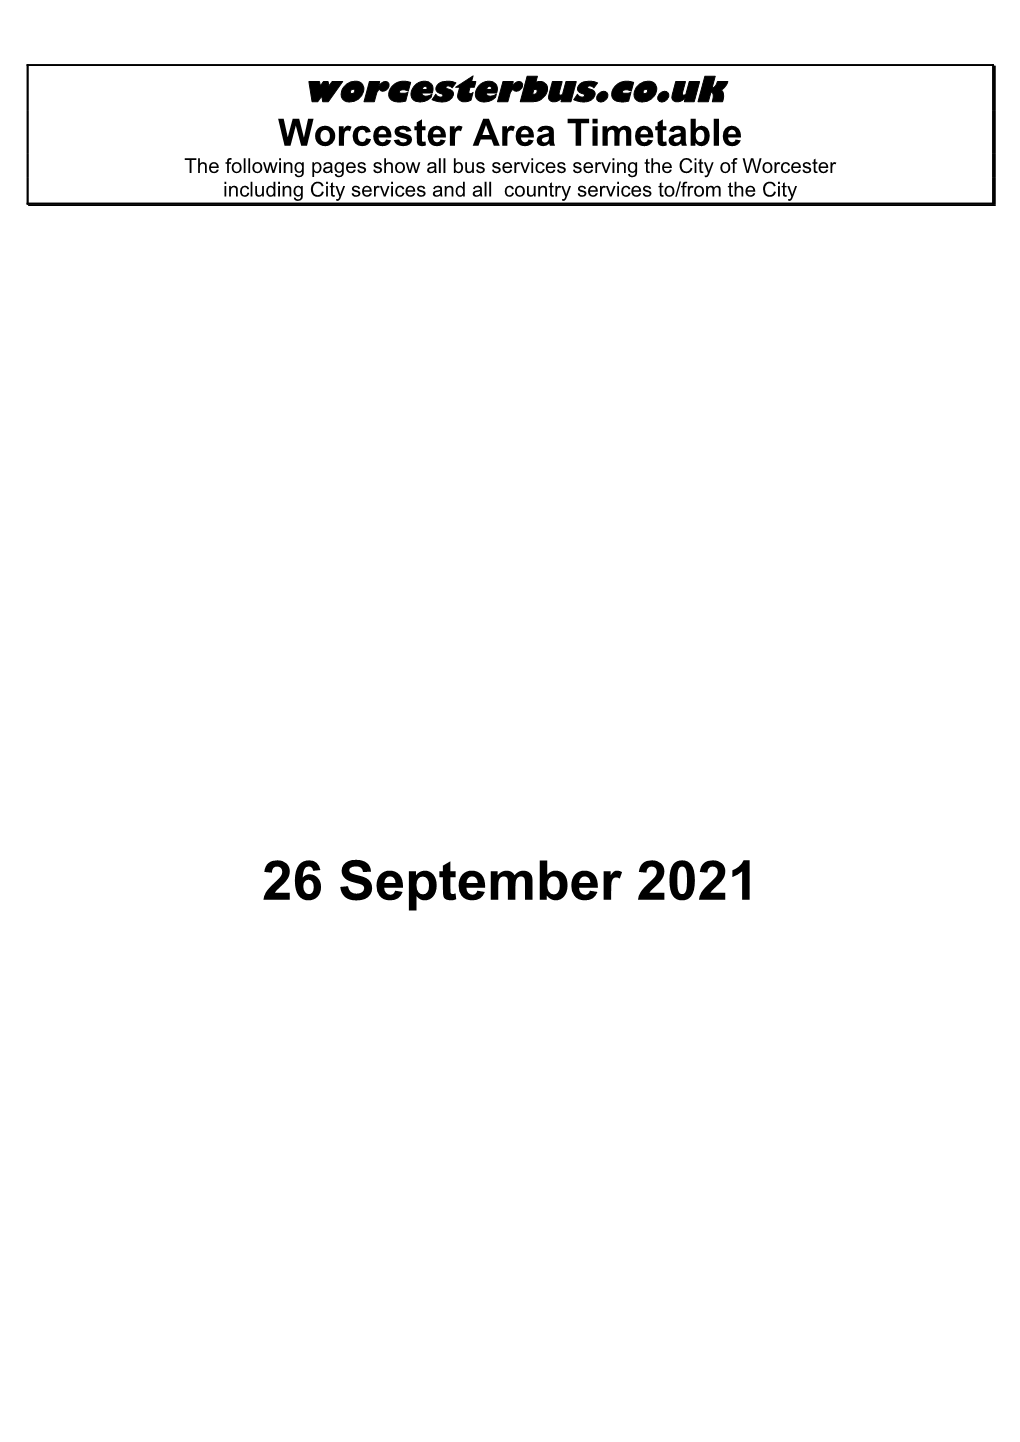 From 18 July 2021